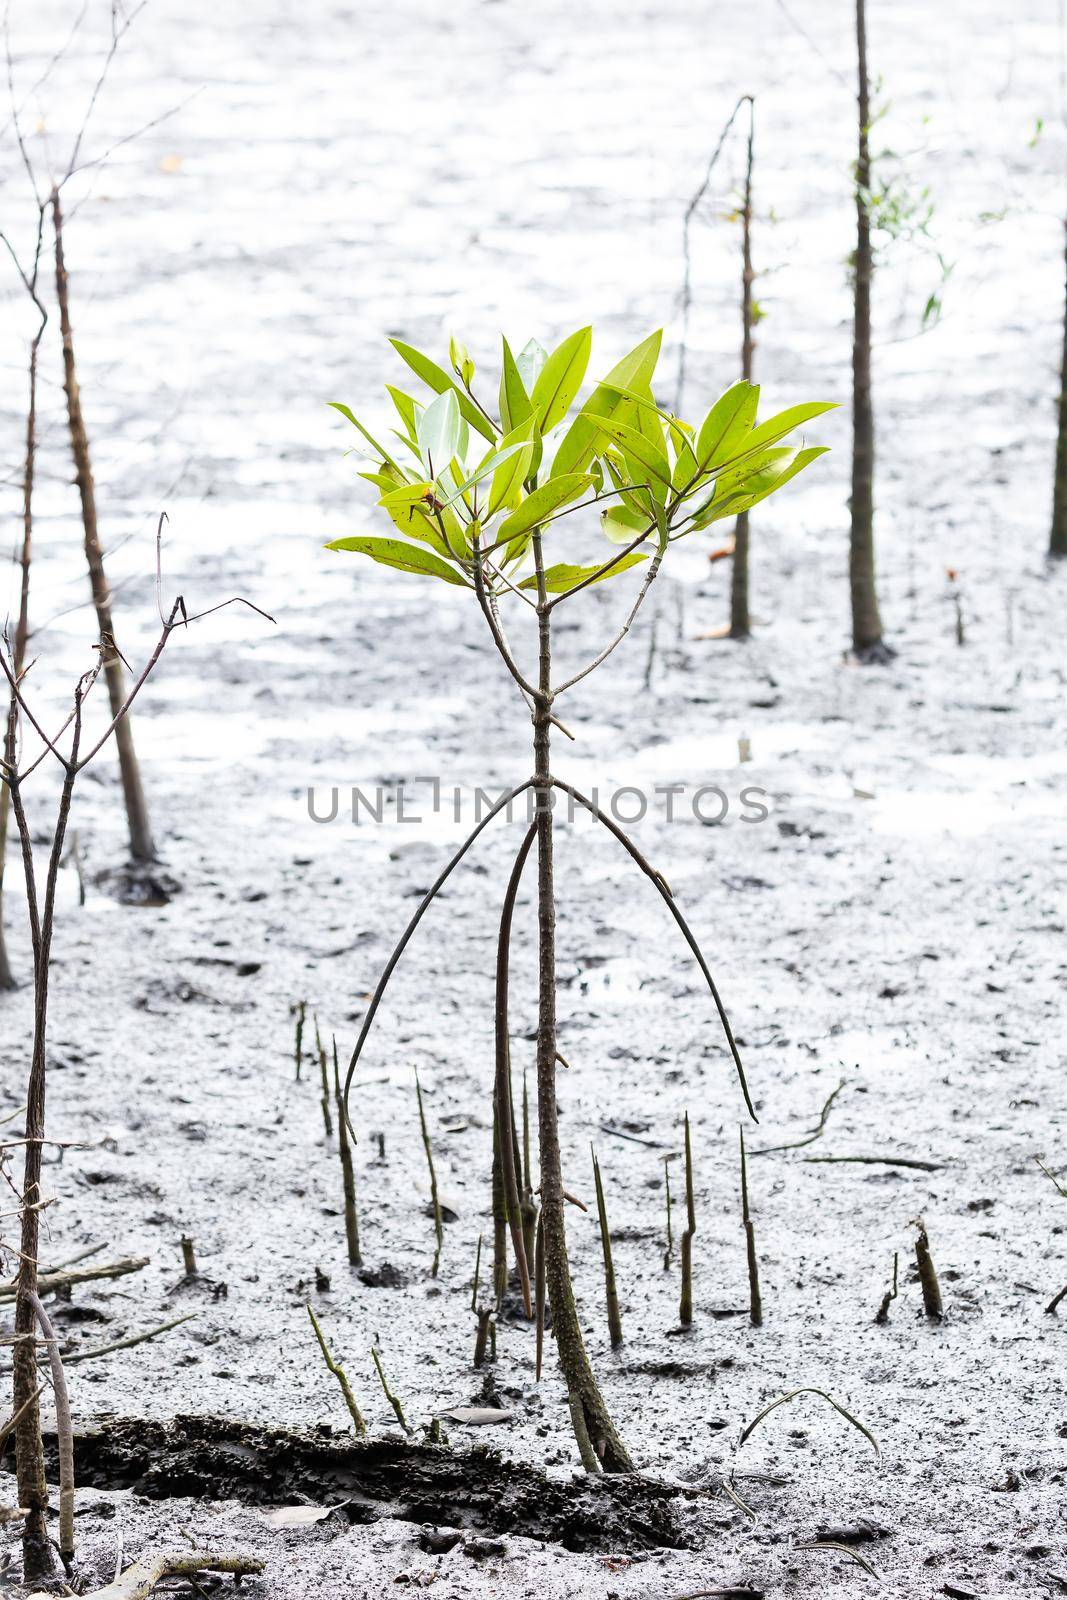 Rhizophora apiculata blume in red mangrove area, special tree with prop or buttress root and also for aerating